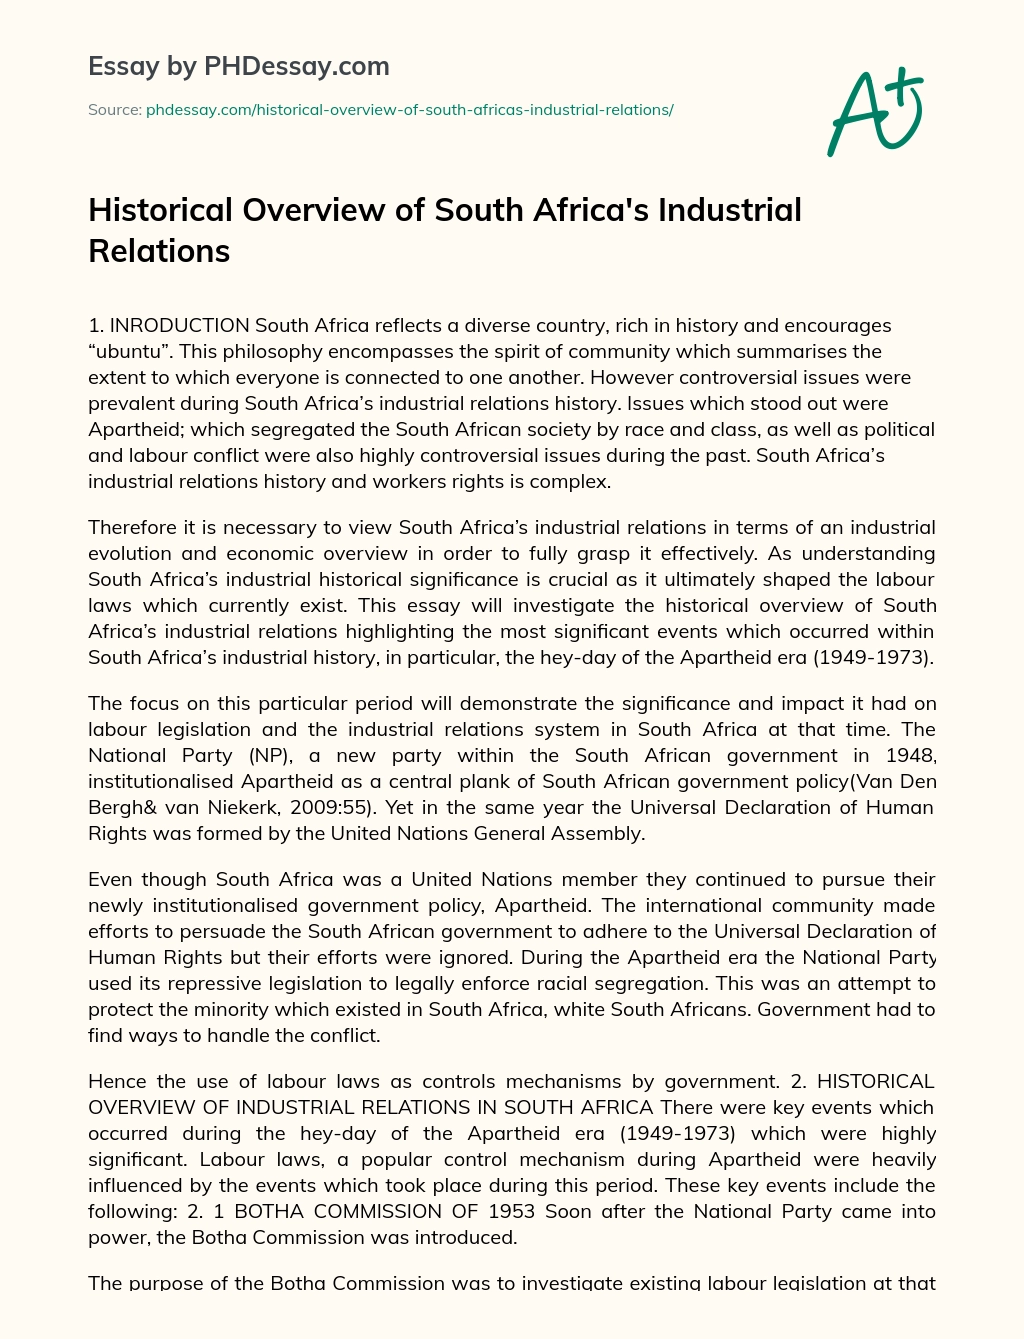 Historical Overview of South Africa’s Industrial Relations essay